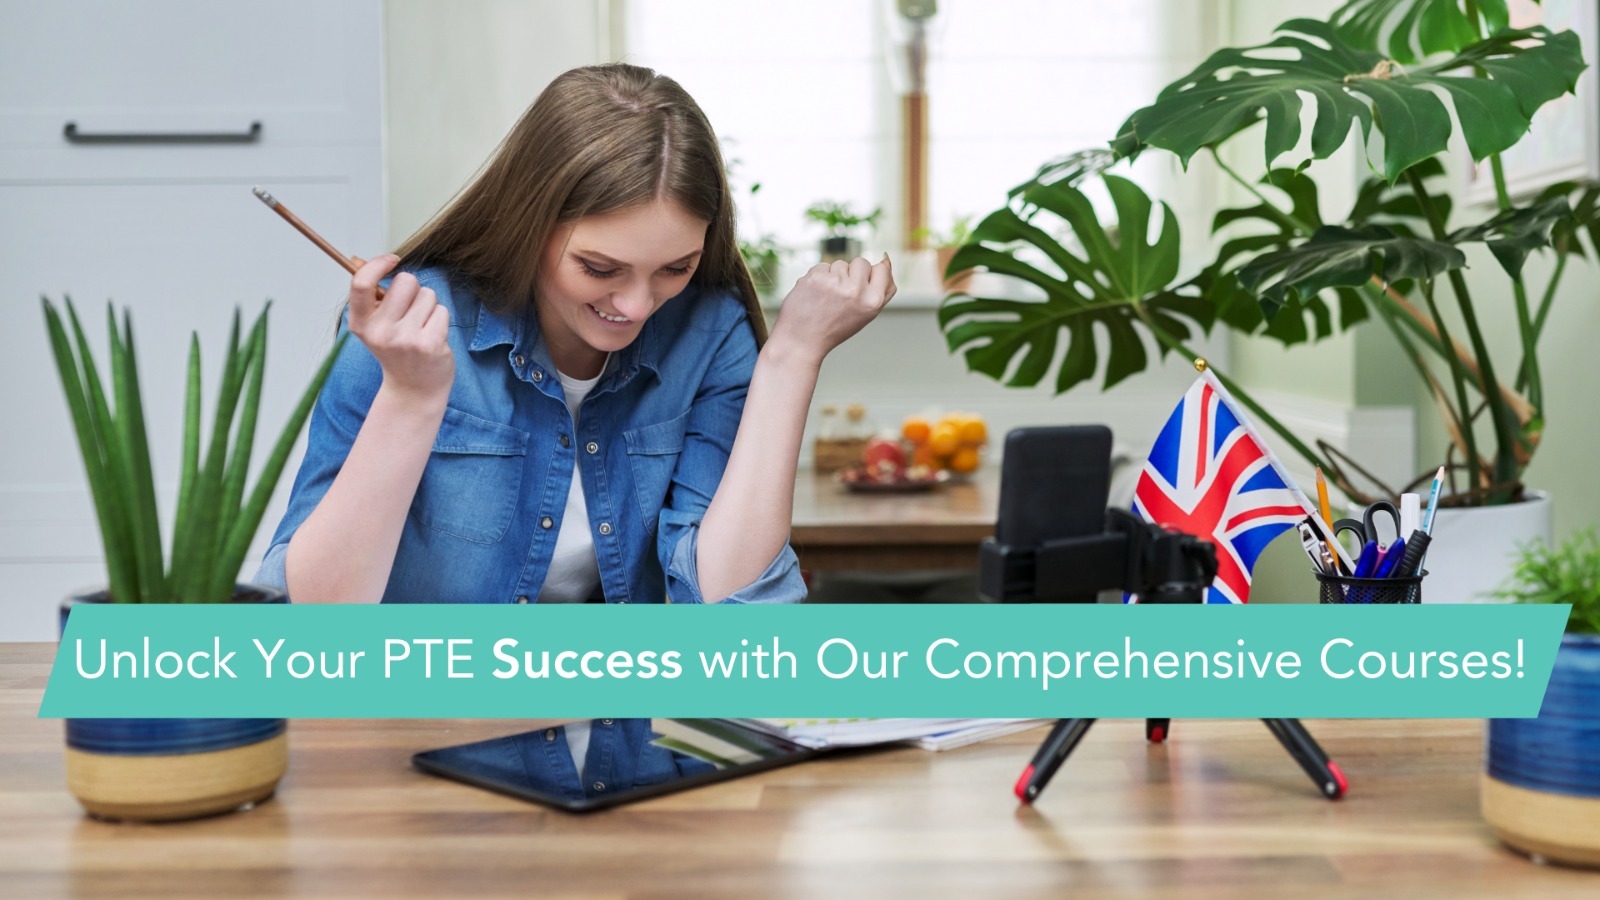 Unlock Your PTE Success with Our Comprehensive Courses!